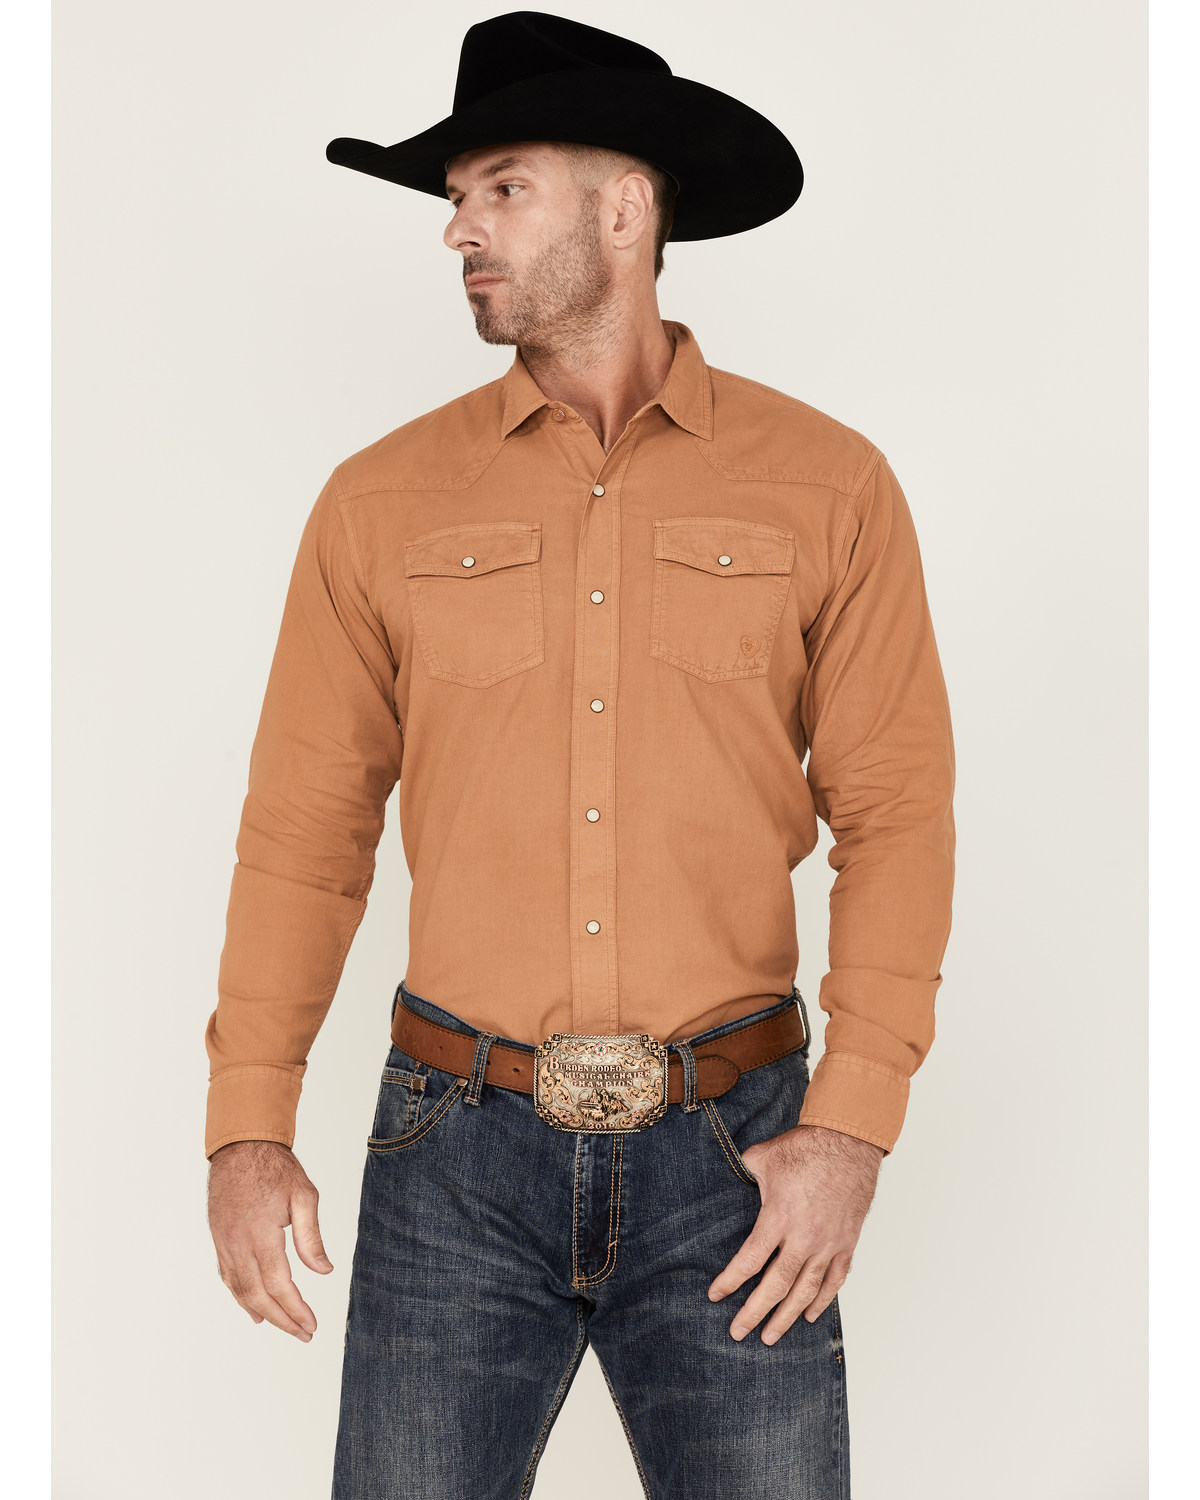 Ariat Men's Ace Solid Retro Long Sleeve Snap Western Shirt